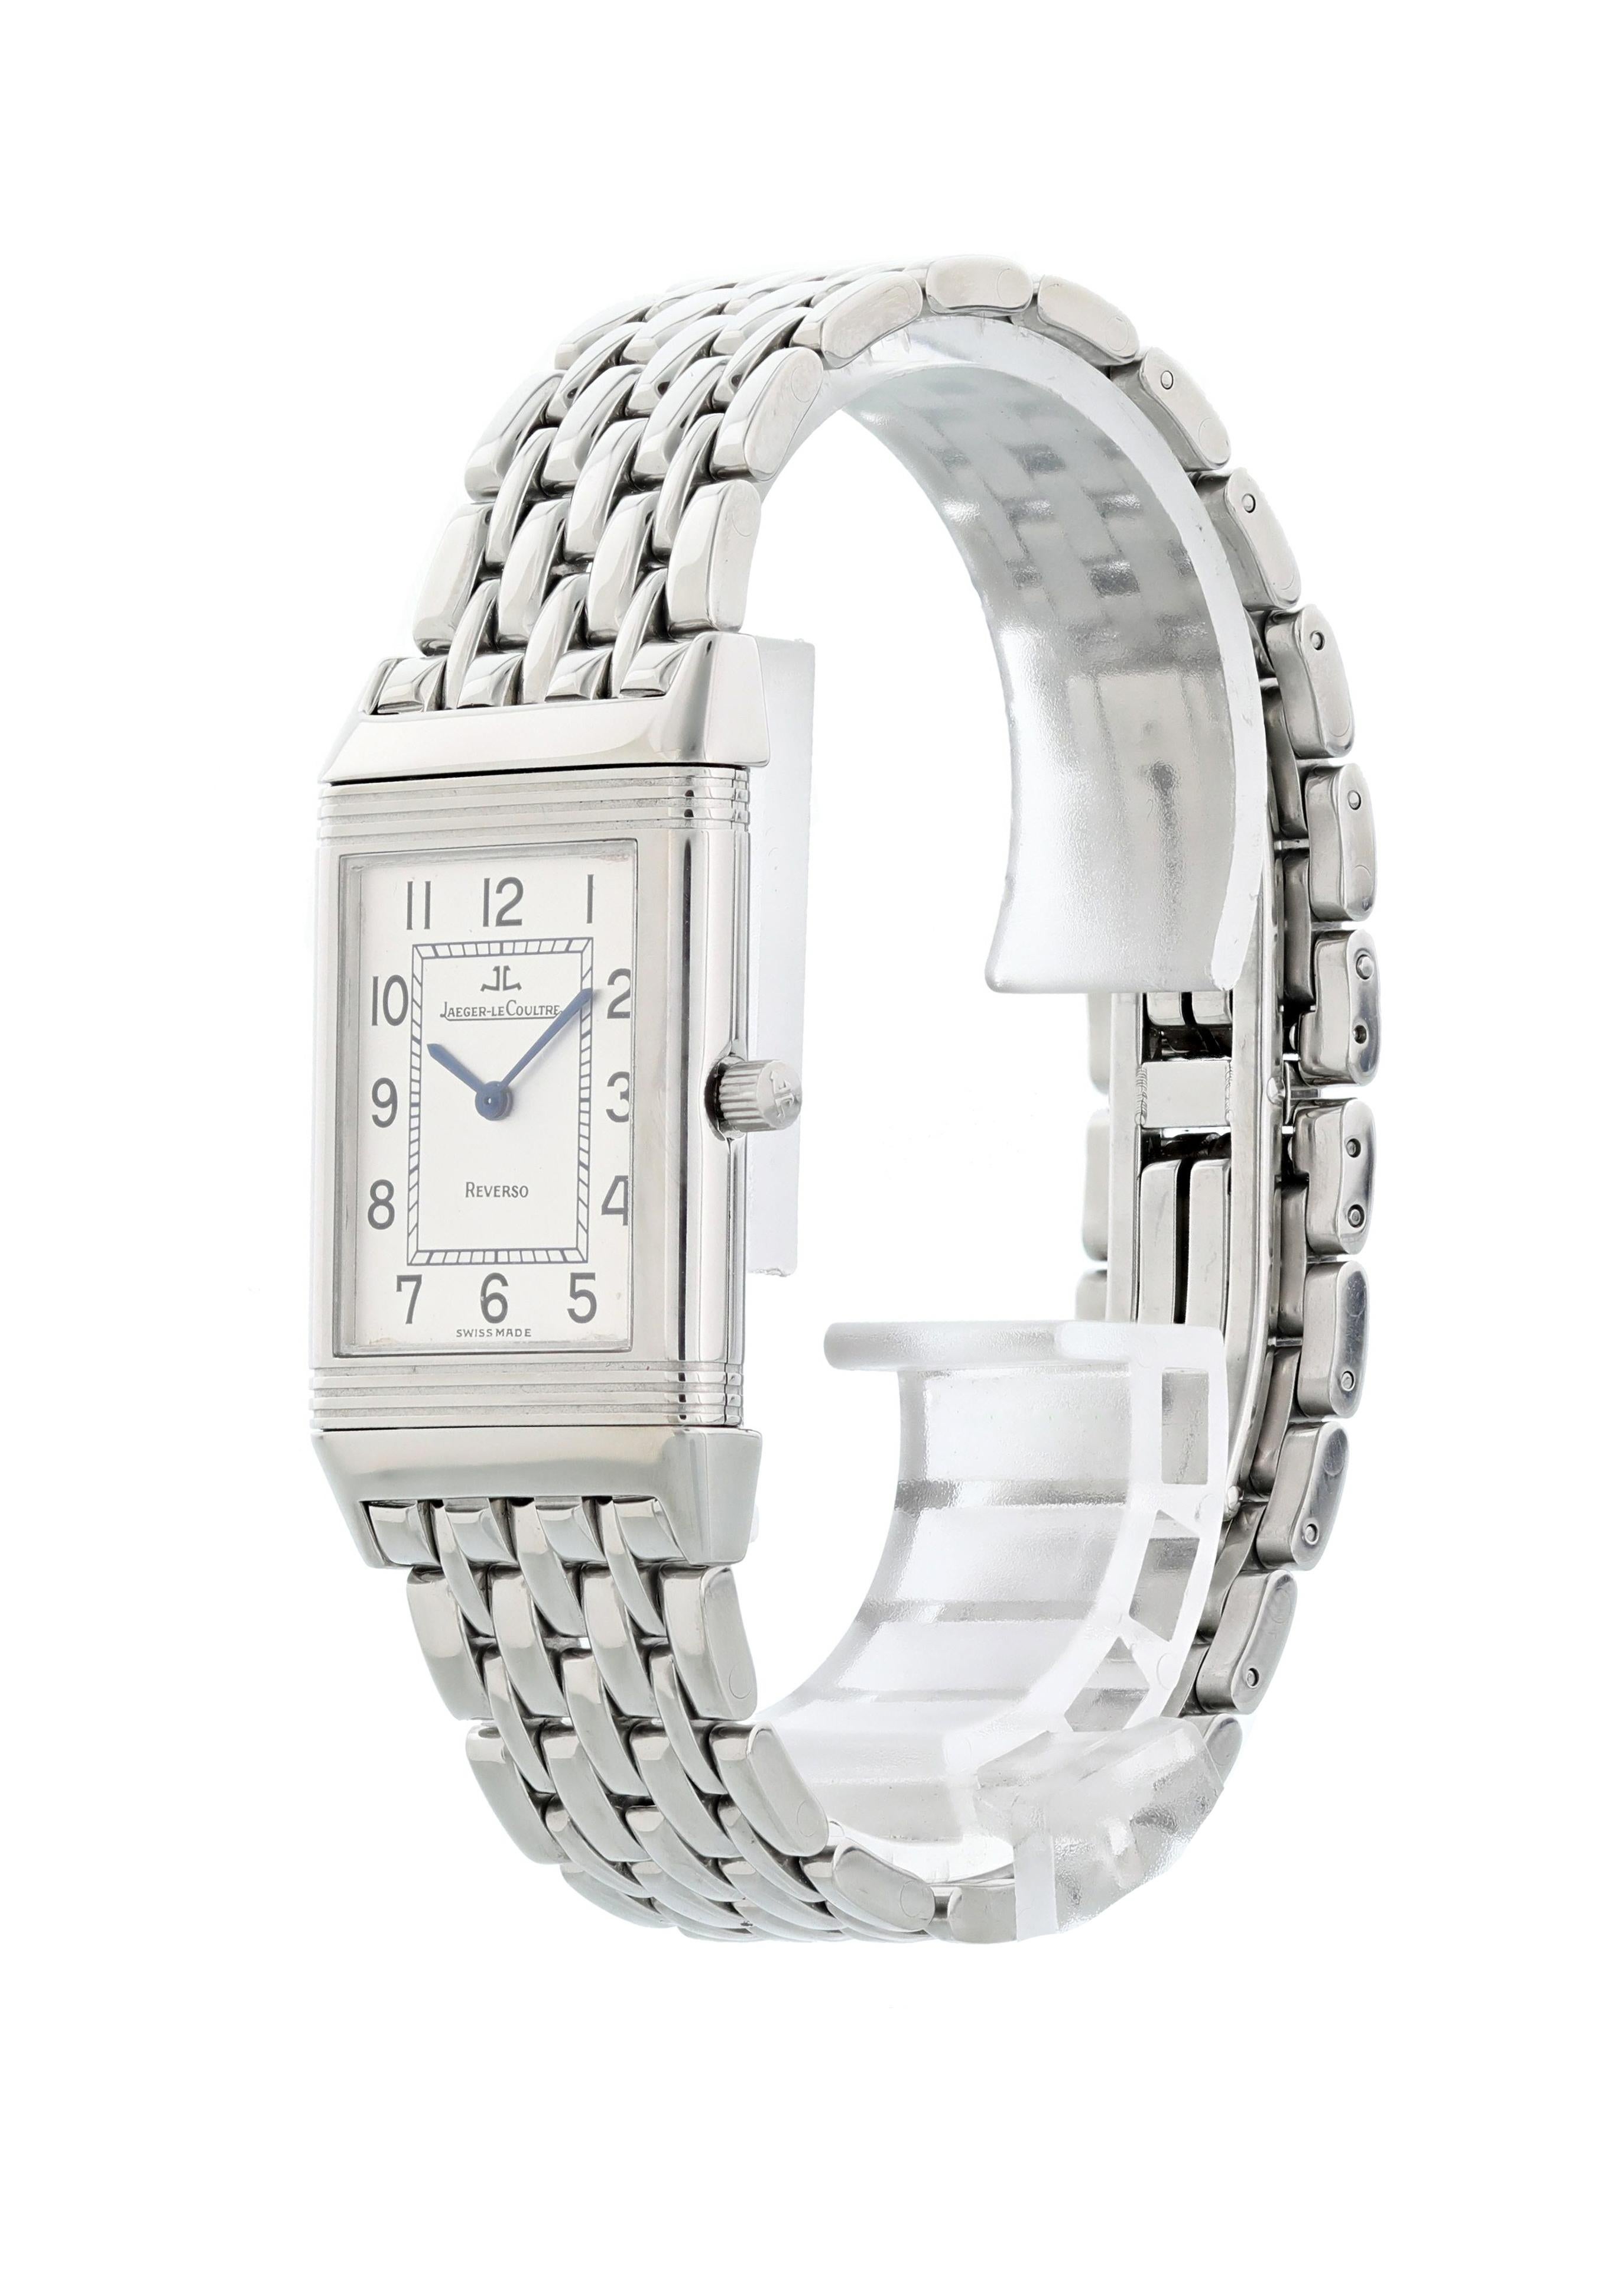 Jaeger-Le Coultre Reverso Classic 250.8.08 Watch. 23mm stainless steel rectangular case with reeded ends rotating within its back plate.  Silver dial with blue steel hands and Arabic numeral hour markers. Minute markers around an inner ring.